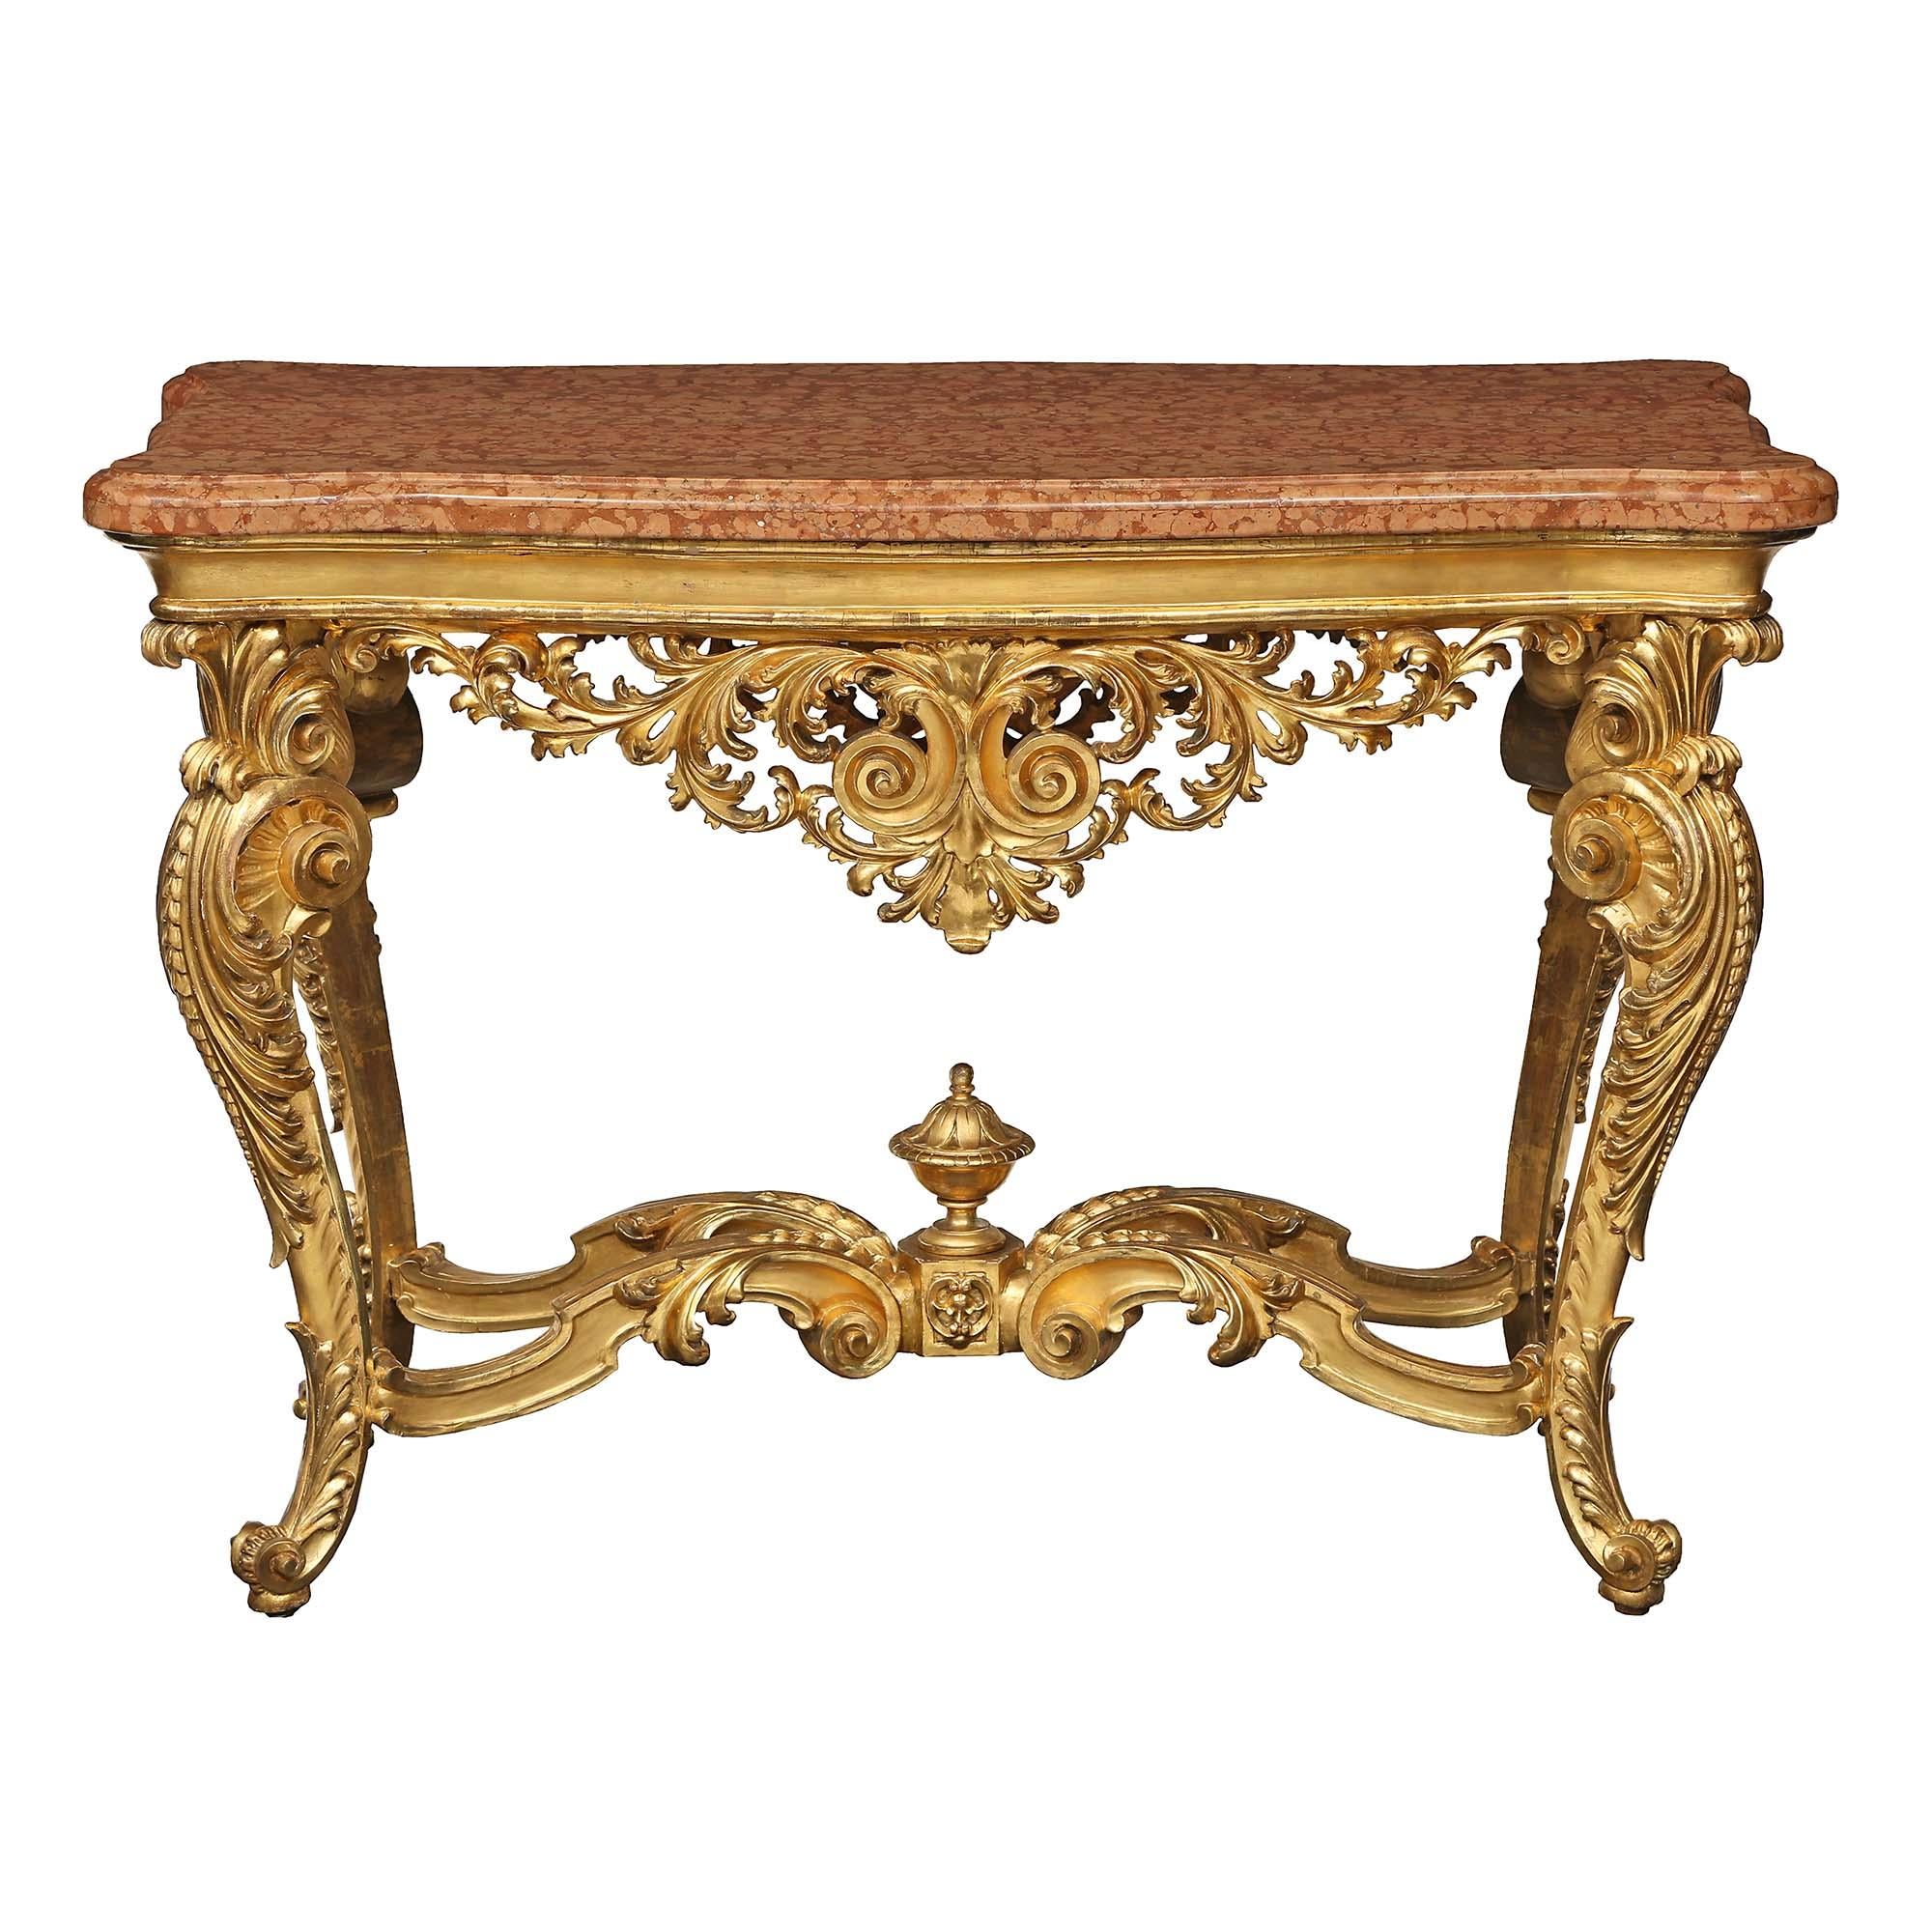 An exceptional Italian 19th century Louis XV st. giltwood center table. The table is raised on elaborately scrolled cabriole legs accented with large scrolls and acanthus leaves. The legs are joined by a scrolled X stretcher centered by hexagon